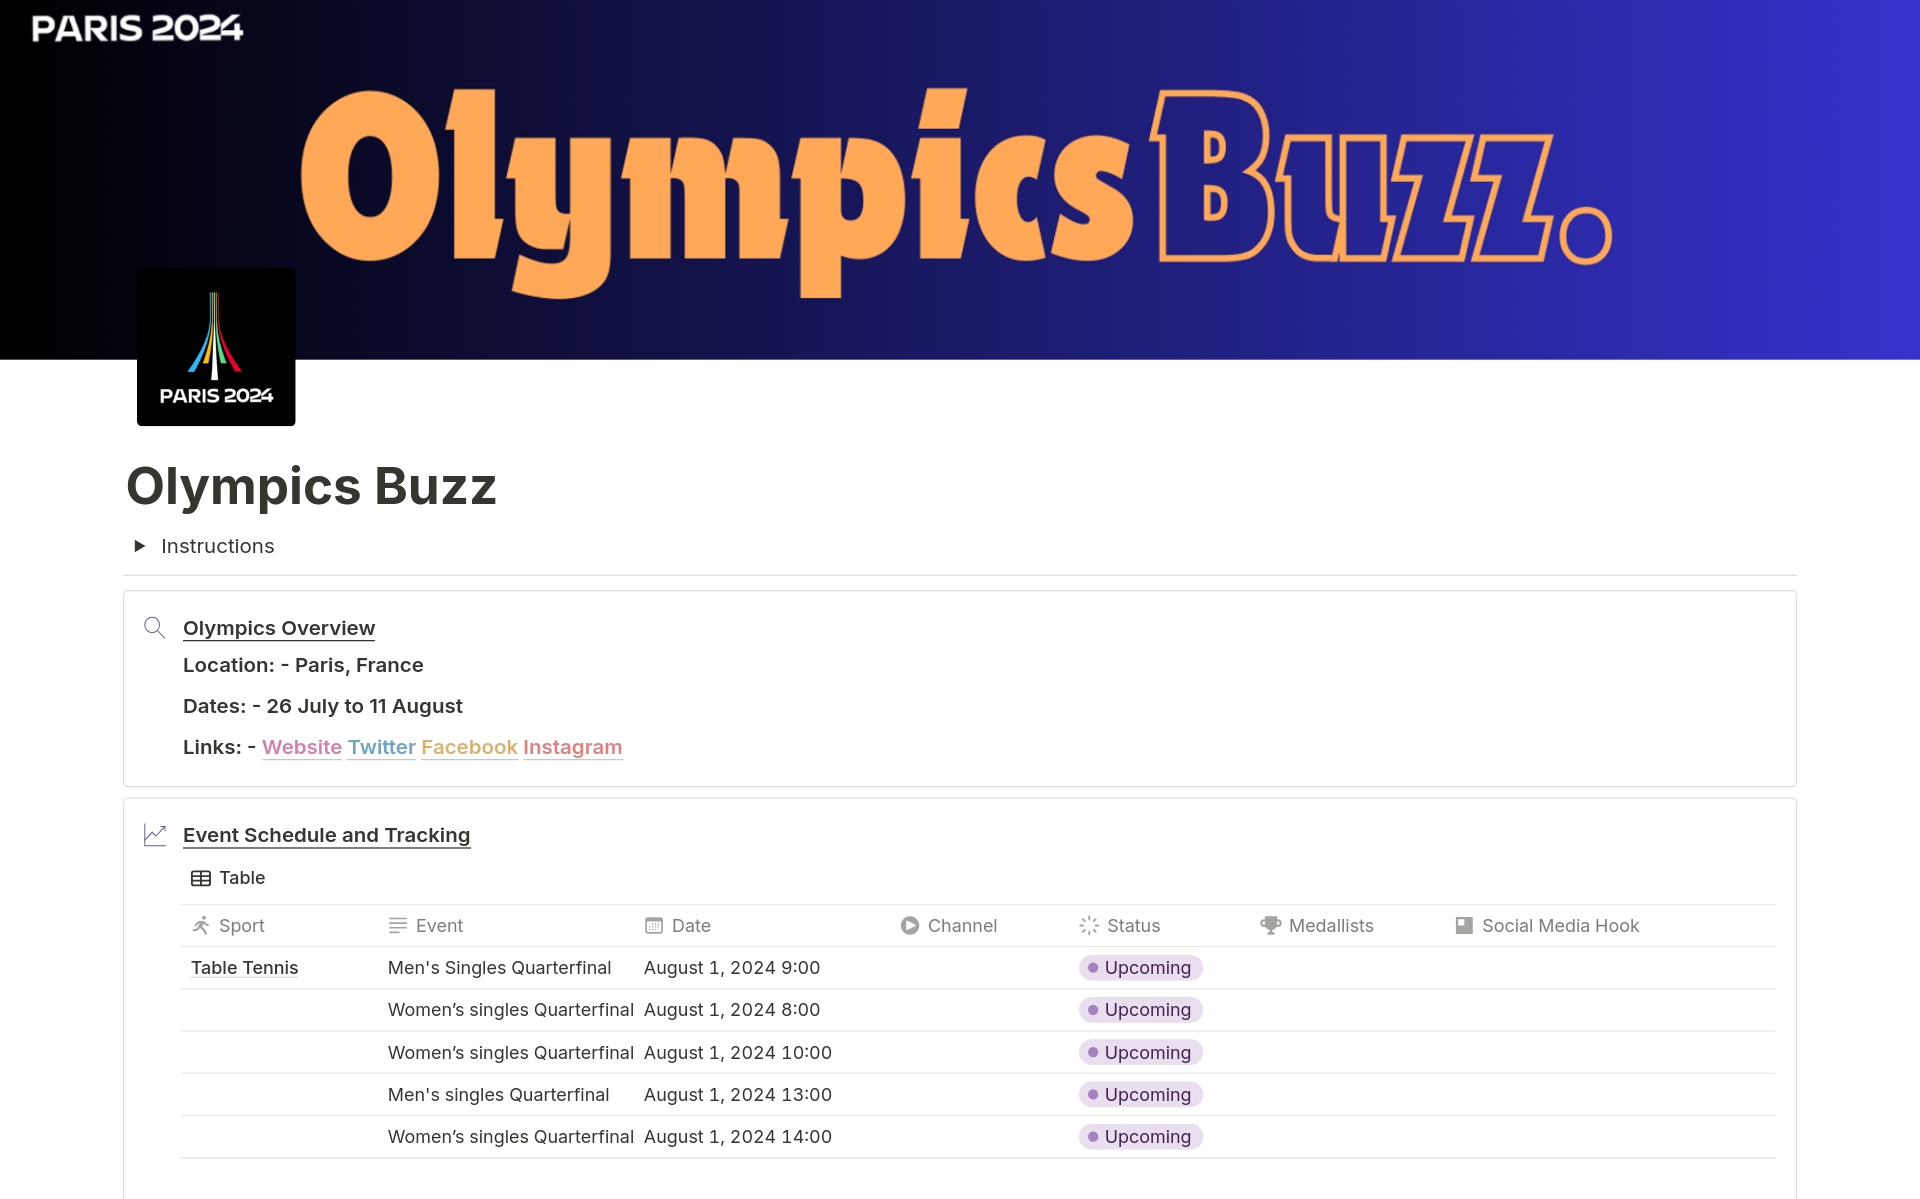 Olympic Odyssey - Buzz Tracker

This template will help you track all the exciting happenings of the Olympics and create engaging social media content!